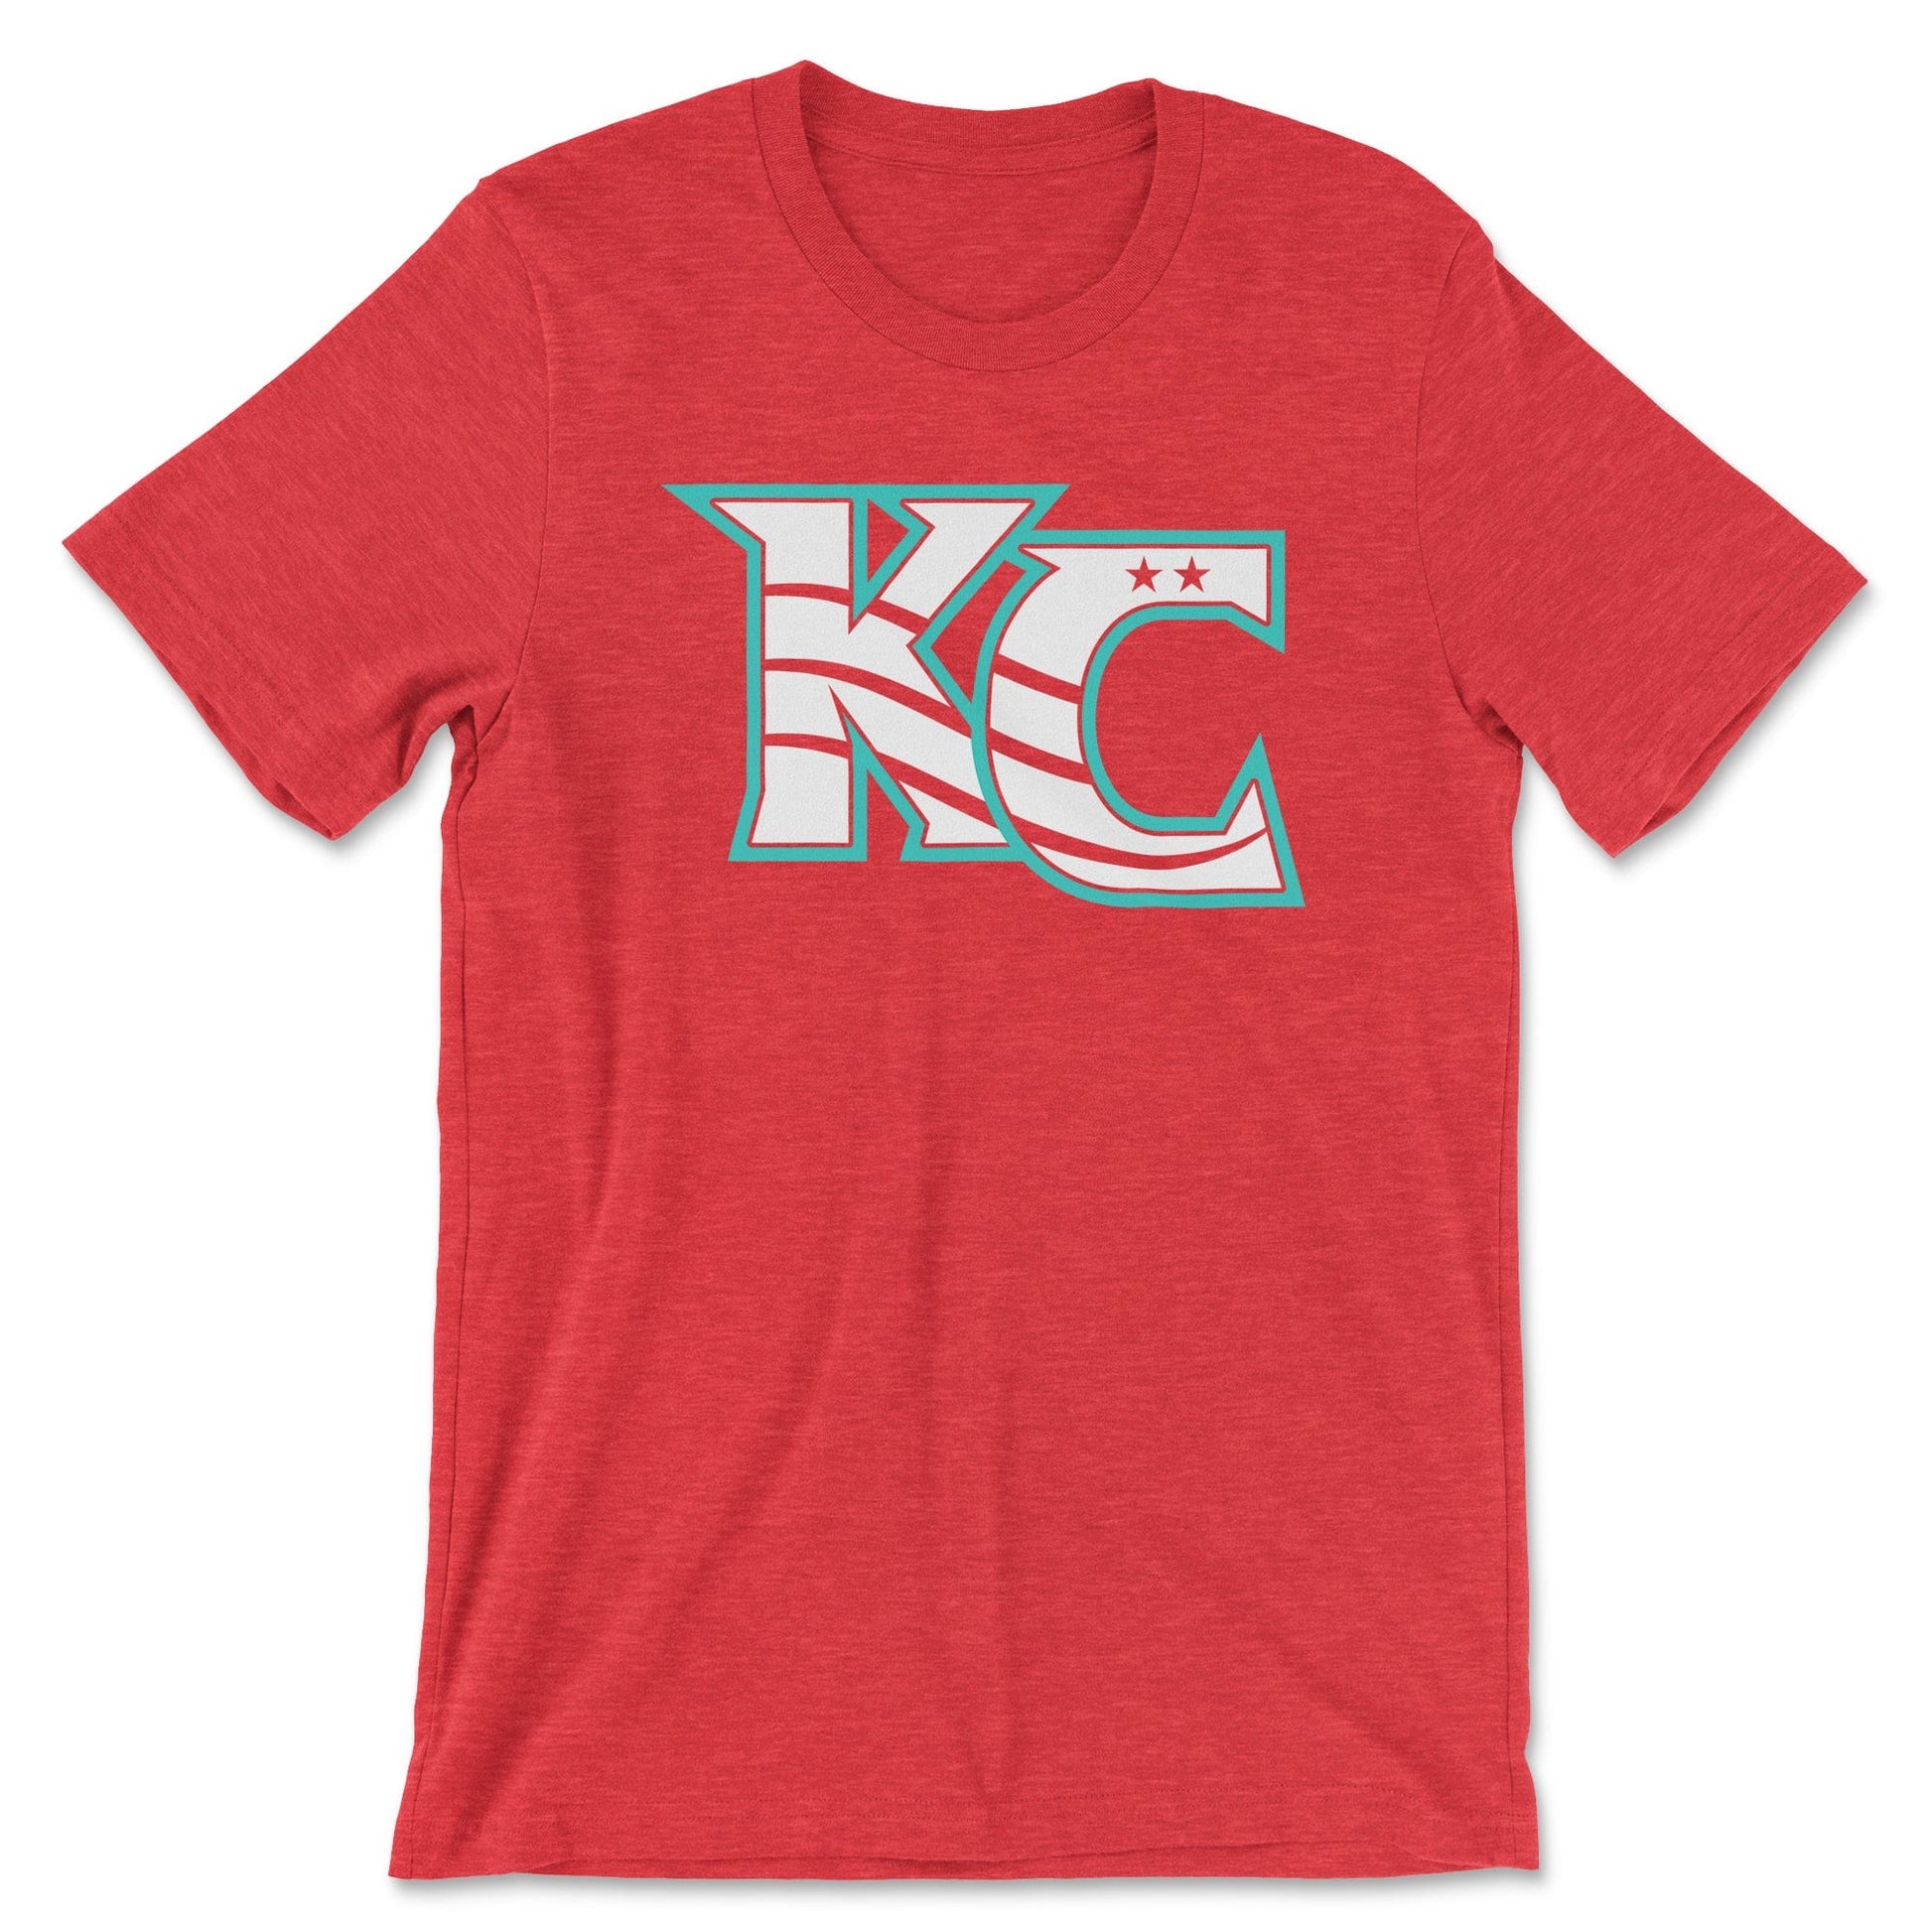 KC Swag Kansas City Current CURRENT KC on heather red unisex t-shirt